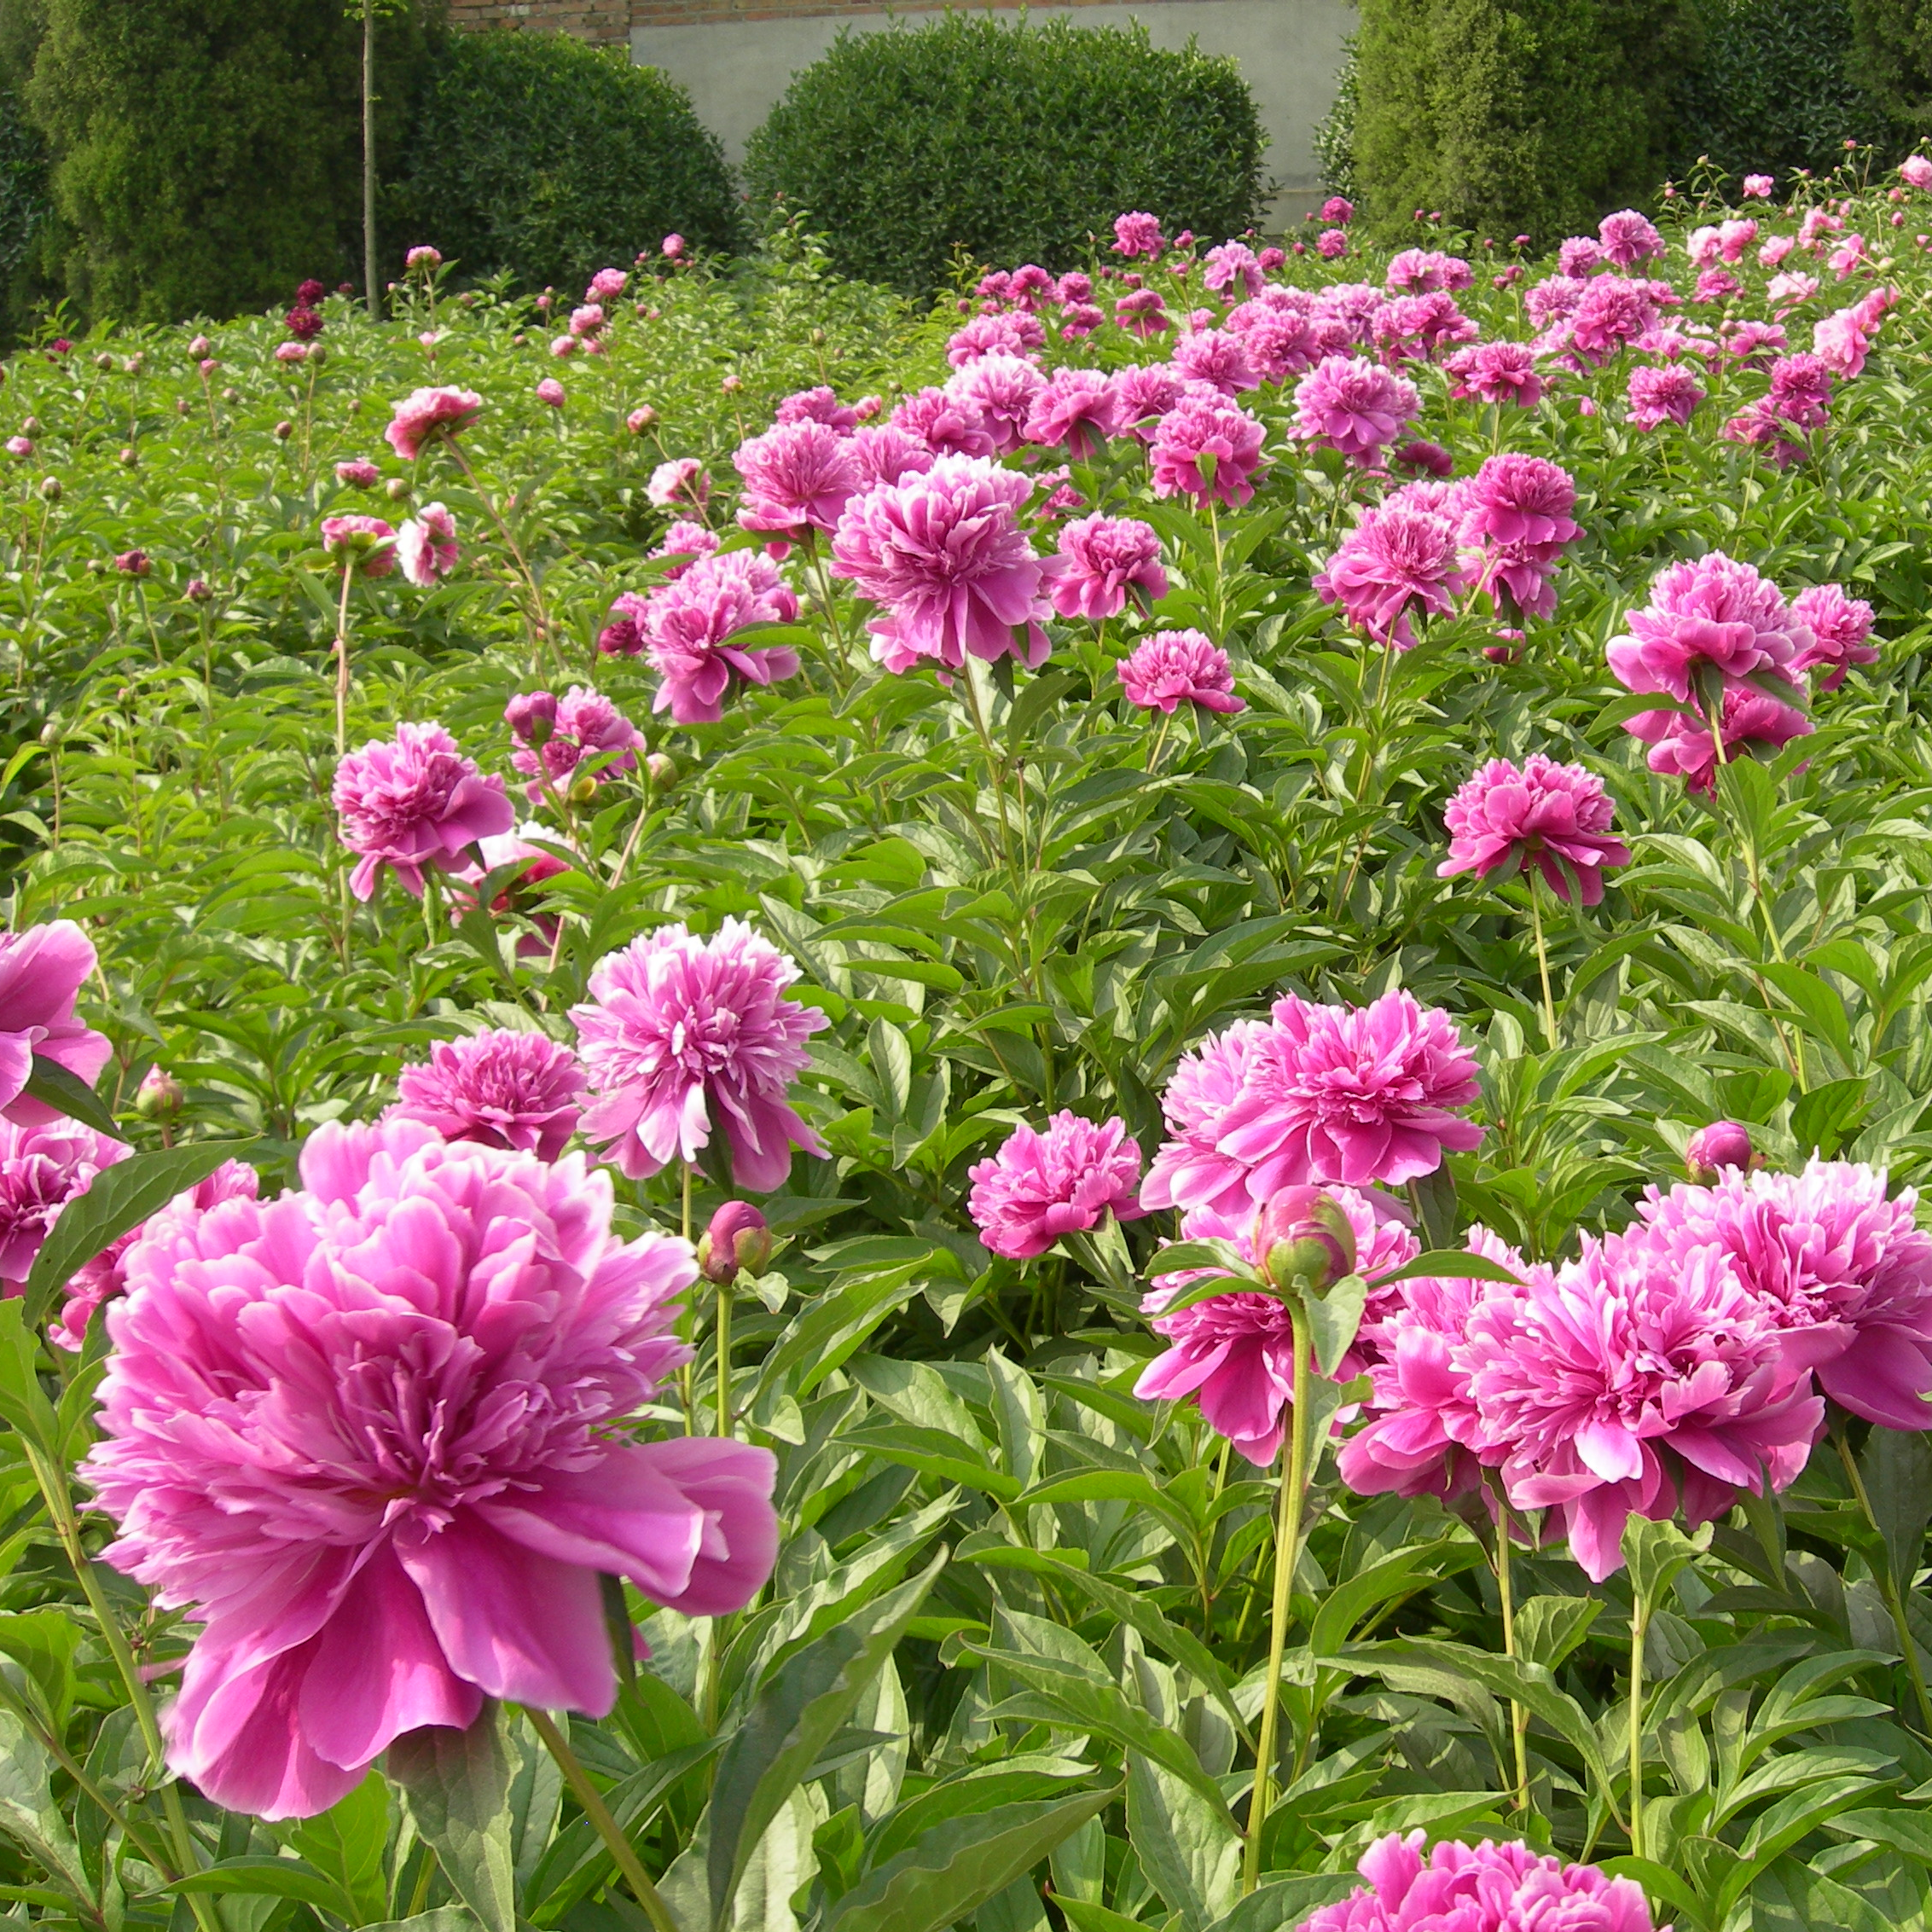  Tree Peony is One of Ten Famous Precious Flowers in China